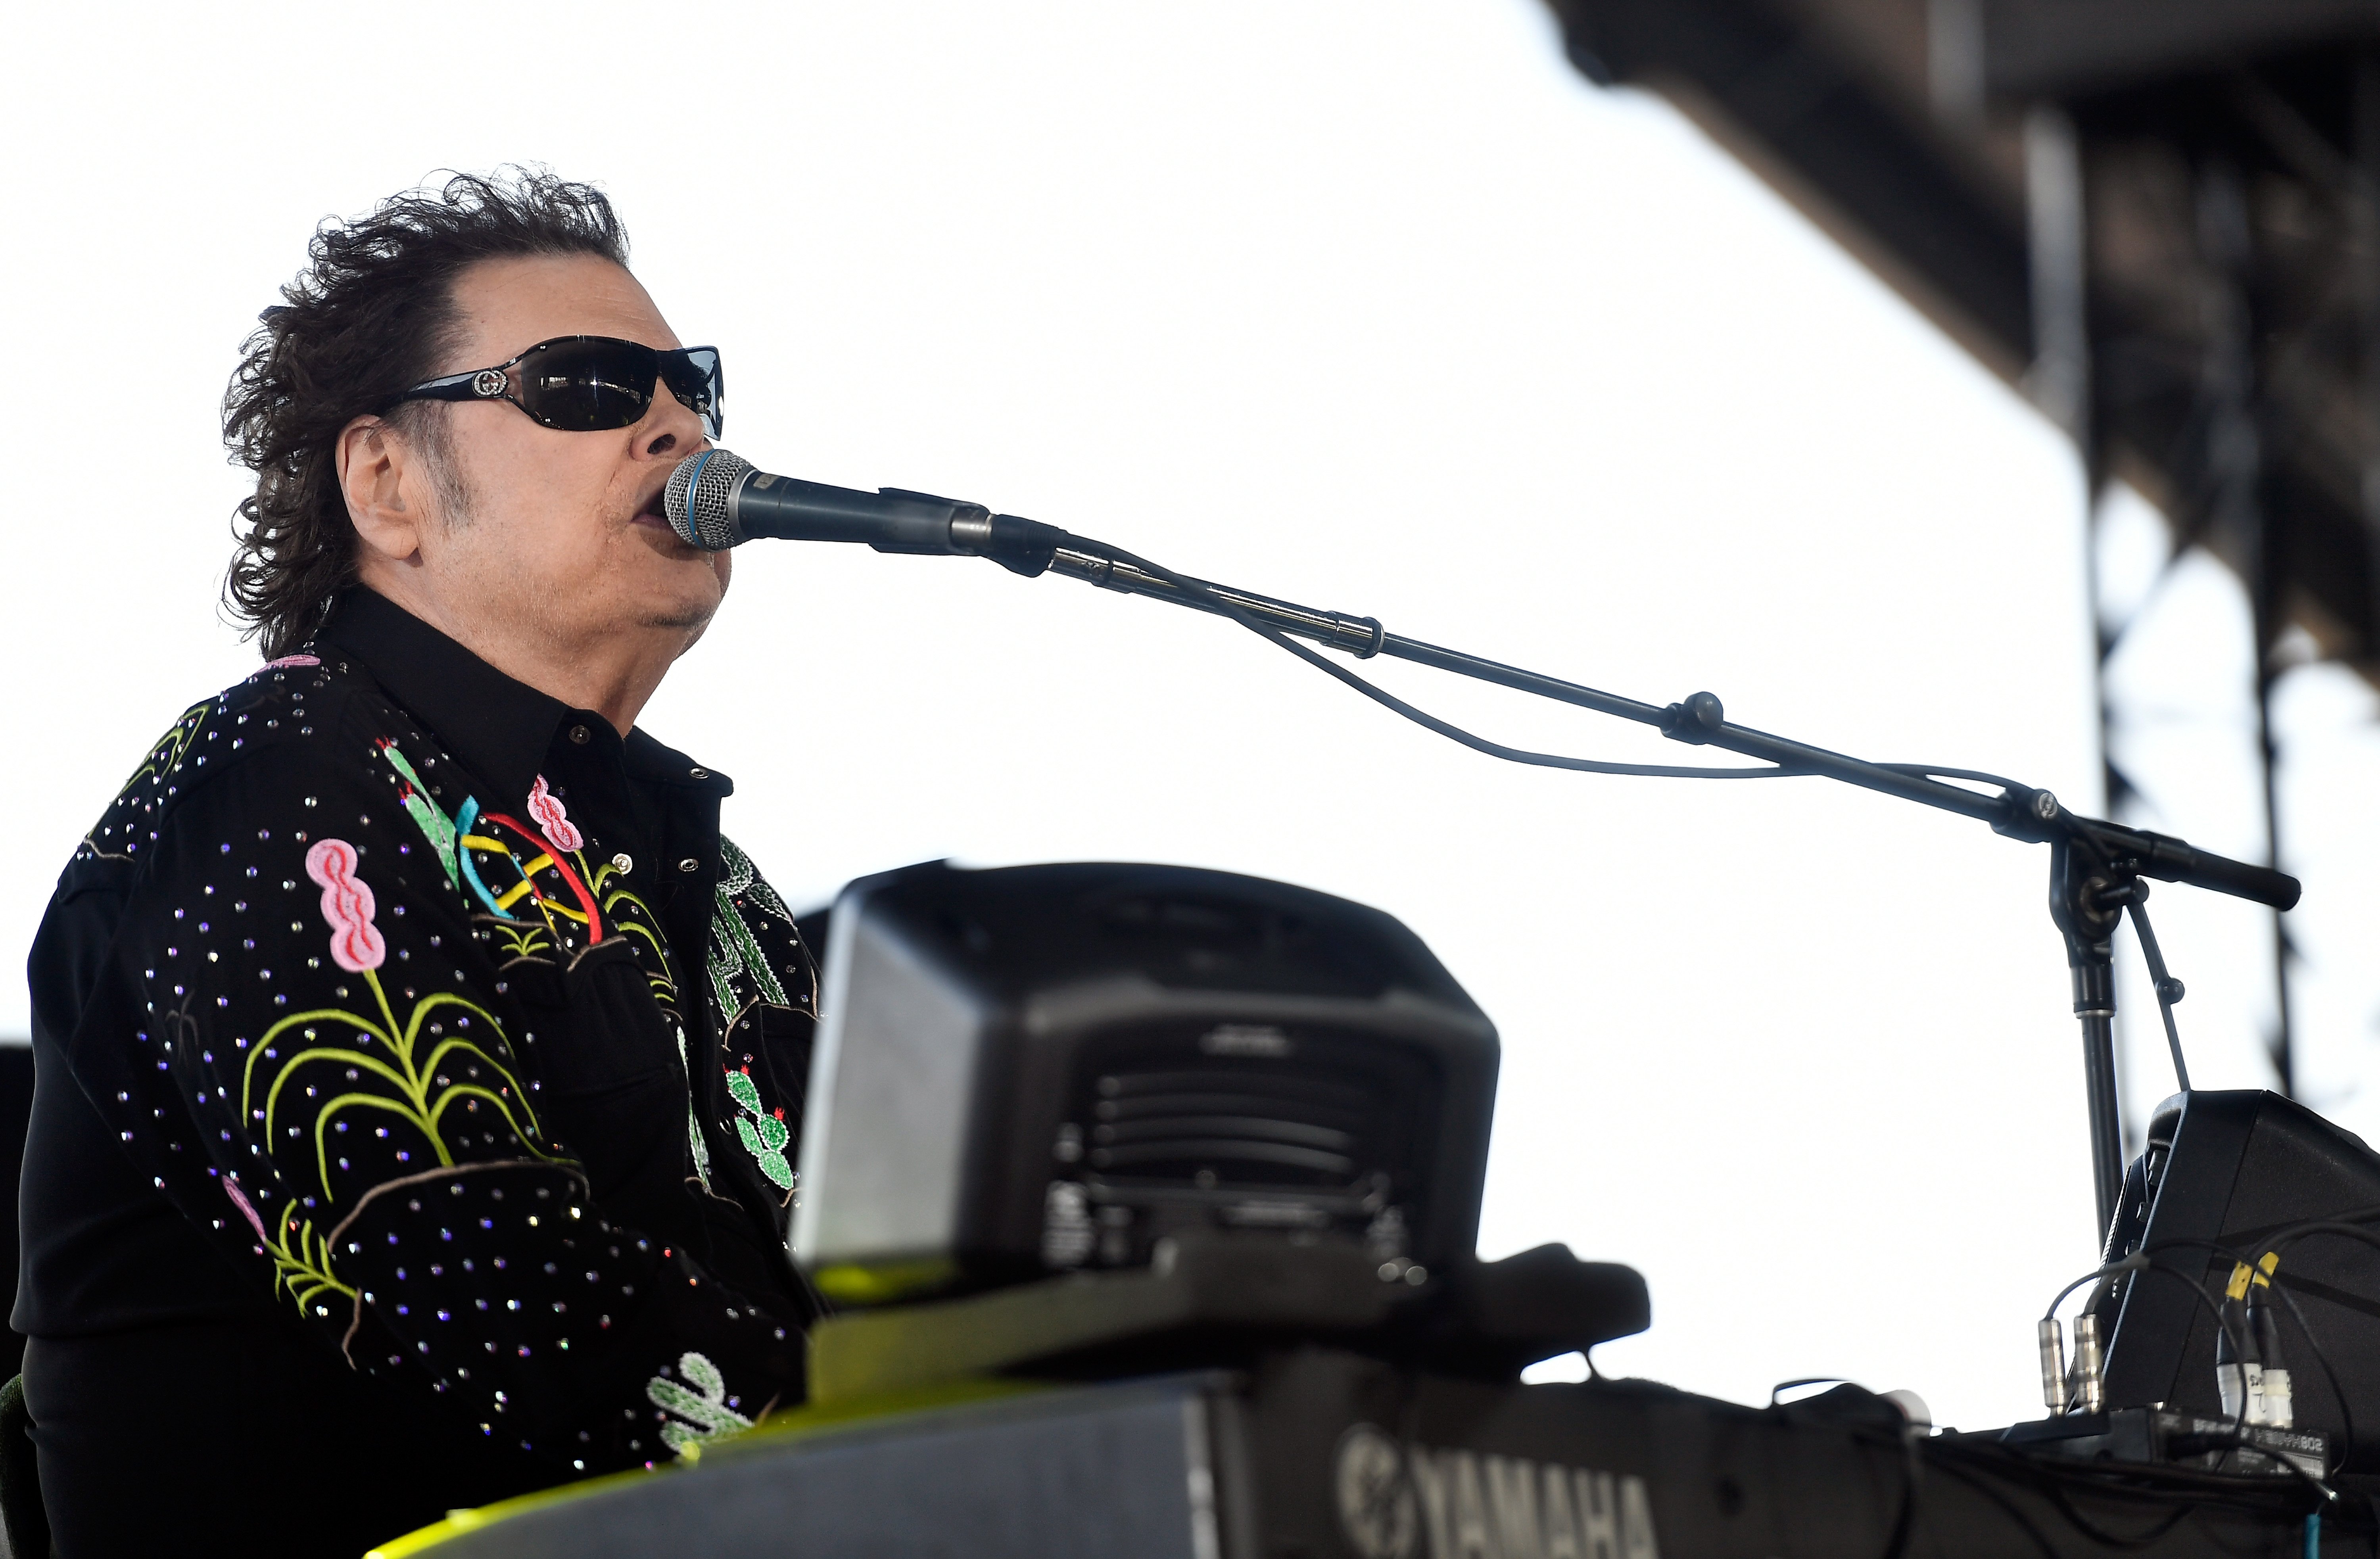 Ronnie Milsap performing at the 2018 Stagecoach California's Country Music Festival on April 28, 2018, in California | Source: Getty Images